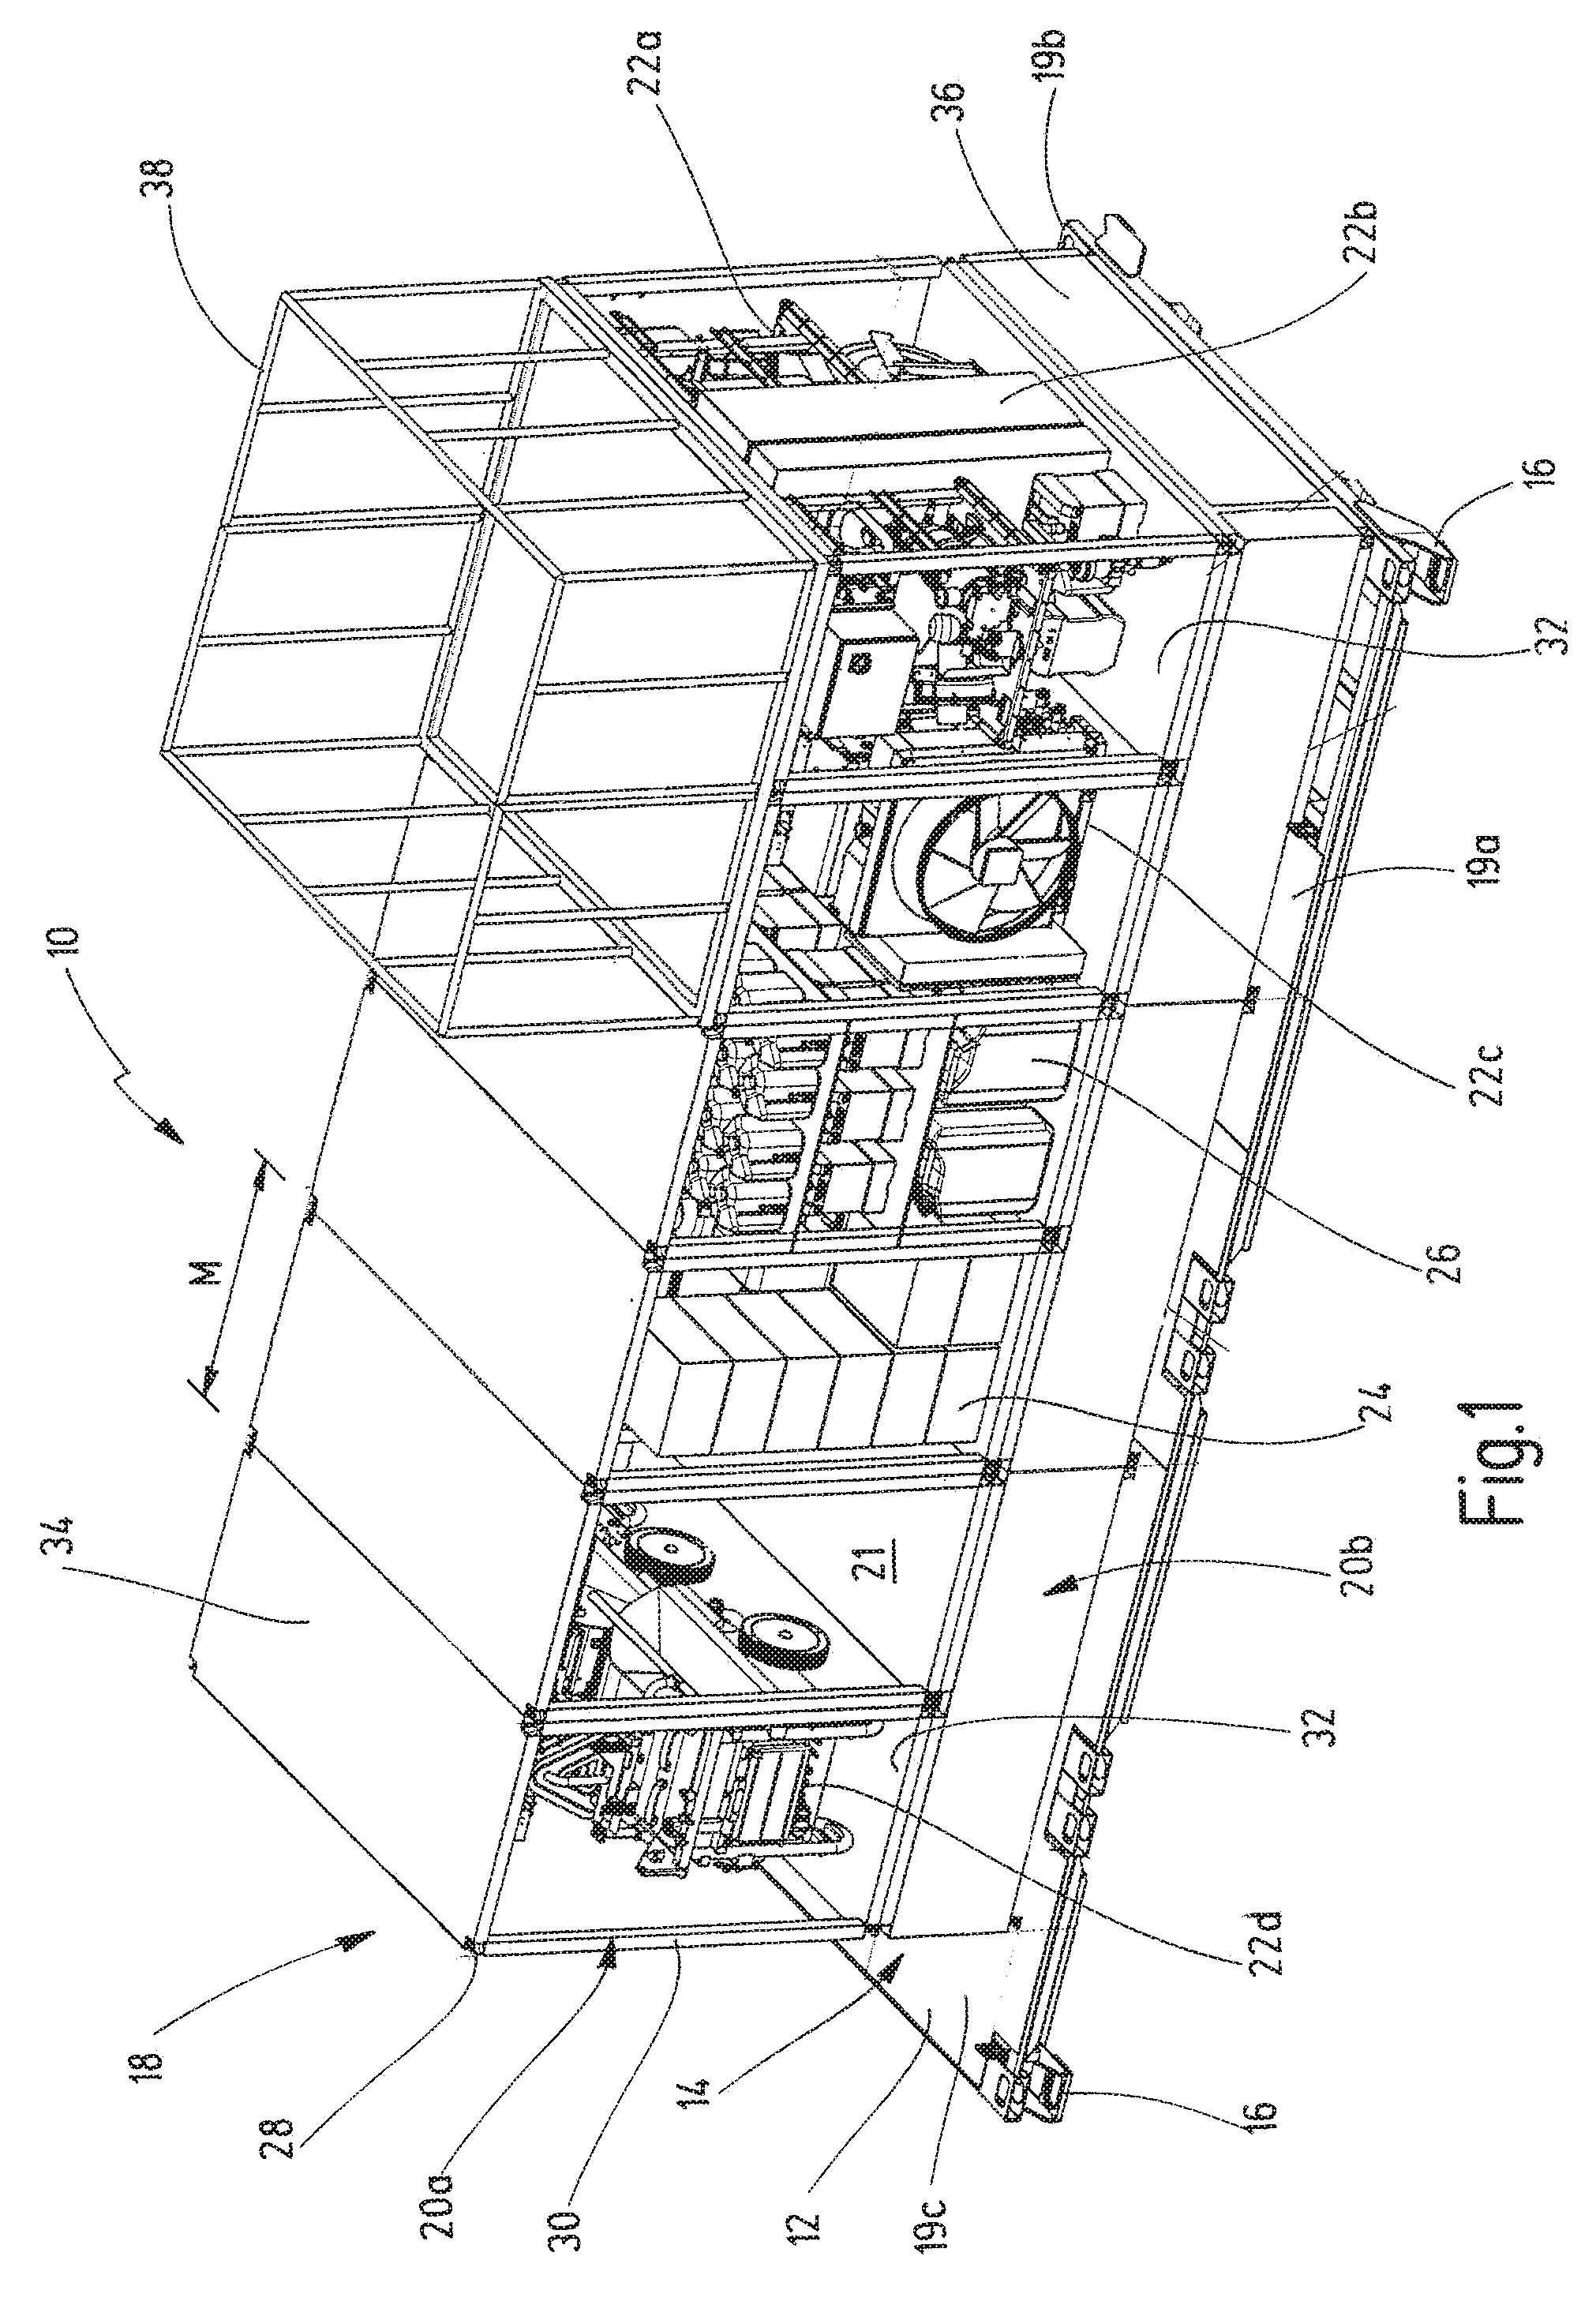 Device system for military and/or humanitarian operations, in particular a mobile decontamination system